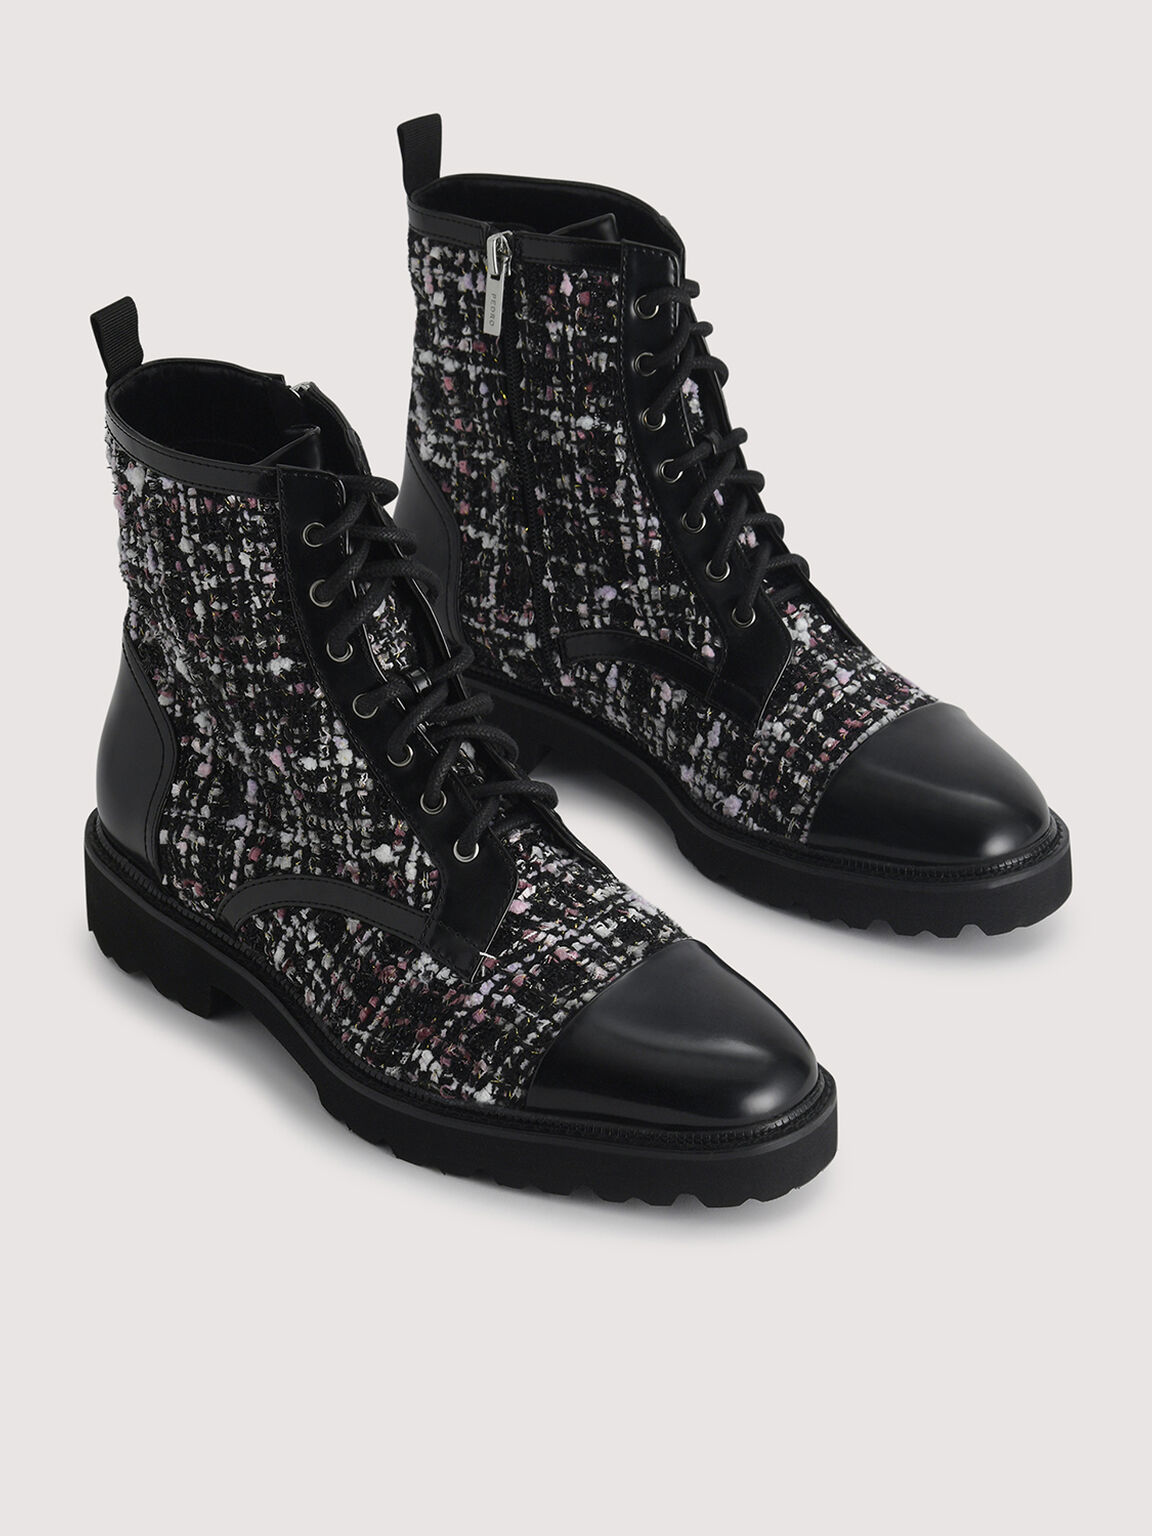 Tweed Lace Up Boots, Black